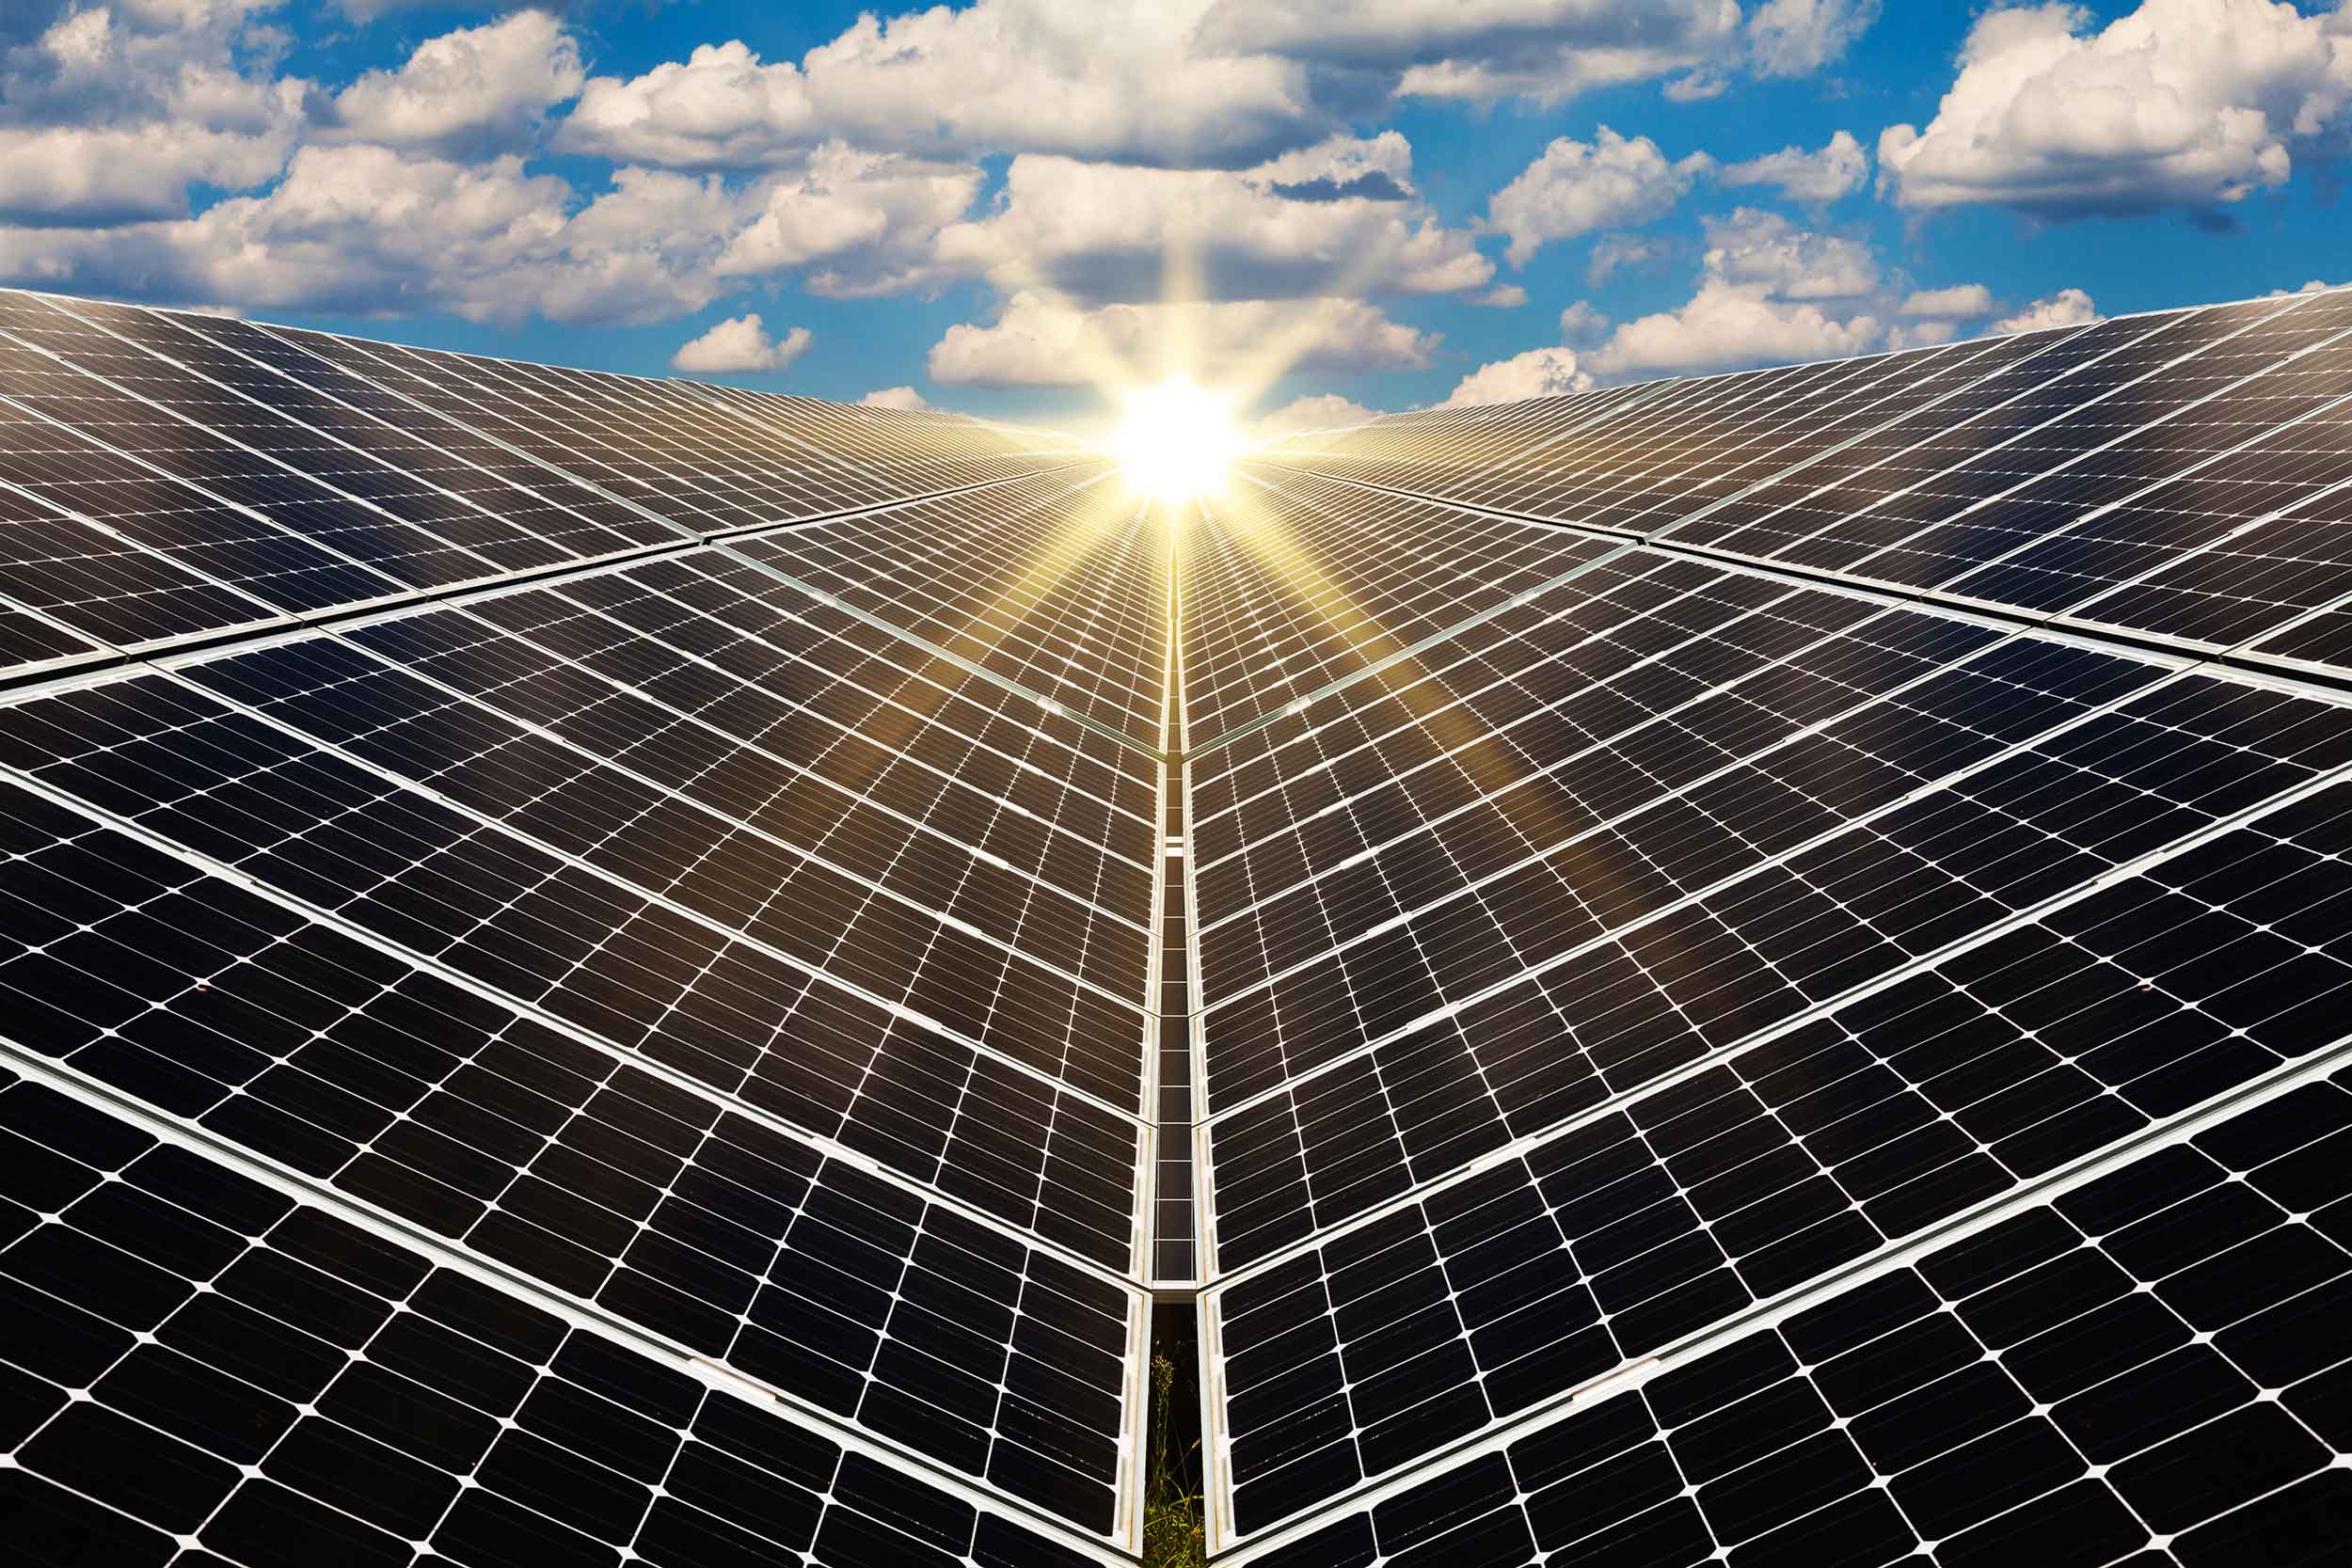 Stock photograph of the sun shining ton a huge array of solar panels with a blue sky background full of puffy clouds